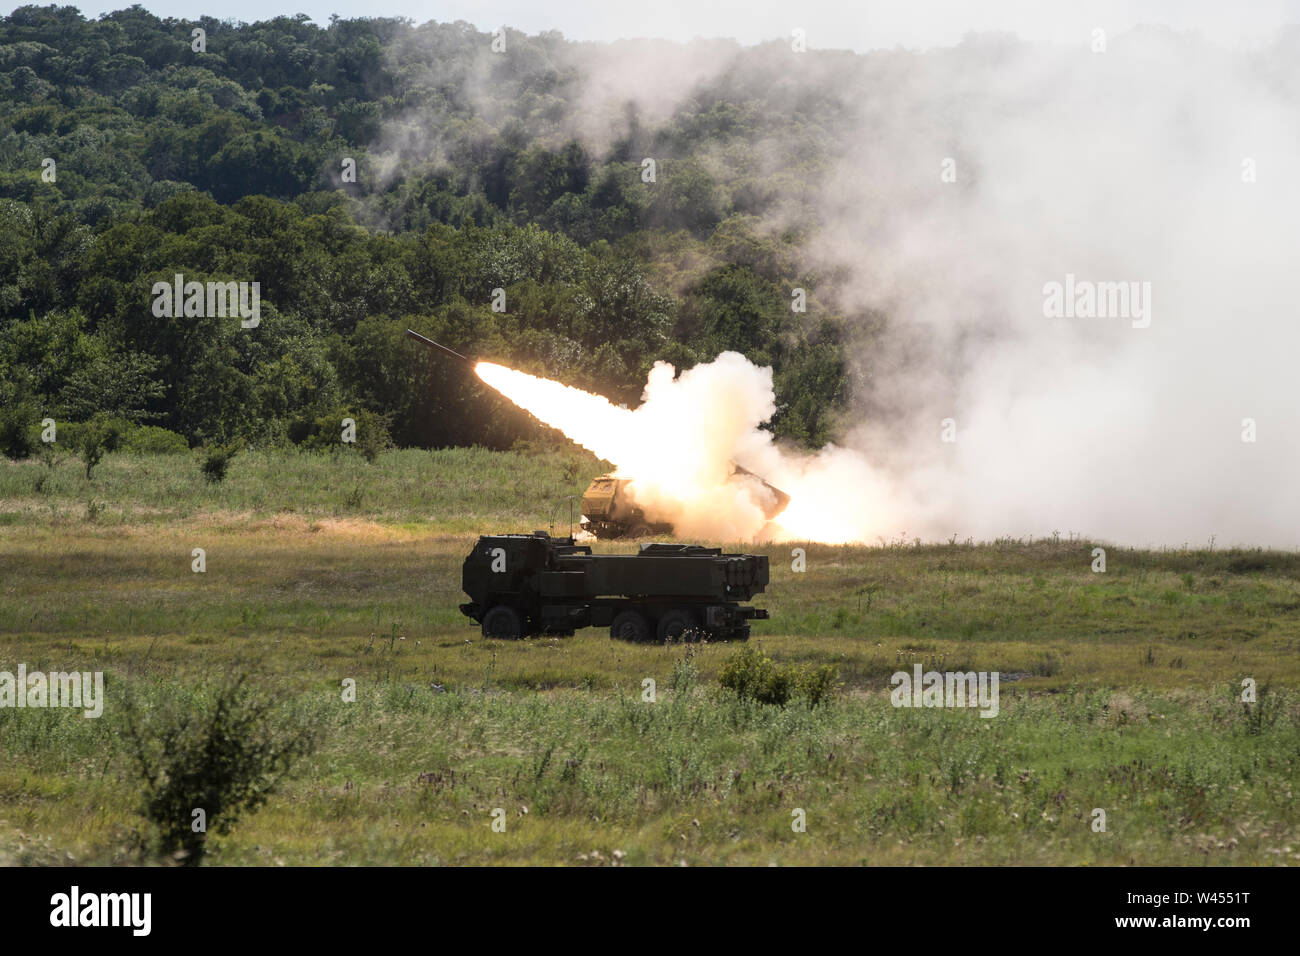 A M124 HIMARS is fired during the 1st Cavalry Division Artillery's joint live-fire exercise with the 2nd Battalion, 14th Marines, 4th Marine Division; 1st Battalion, 82nd Field Artillery, 1st Cavalry Division; 9th Air Support Operations Squadron, 1st Cavalry Division; and 1st Battalion, 227th Aviation Regiment, 1st Cavalry Division on July 18, 2019, Fort Hood, Texas. The purpose of the exercise was to improve the service members' ability to work together during a joint operation. (U.S. Army photo by Pfc. Alisha Edwards; 7th Mobile Public Affairs Detachment) Stock Photo